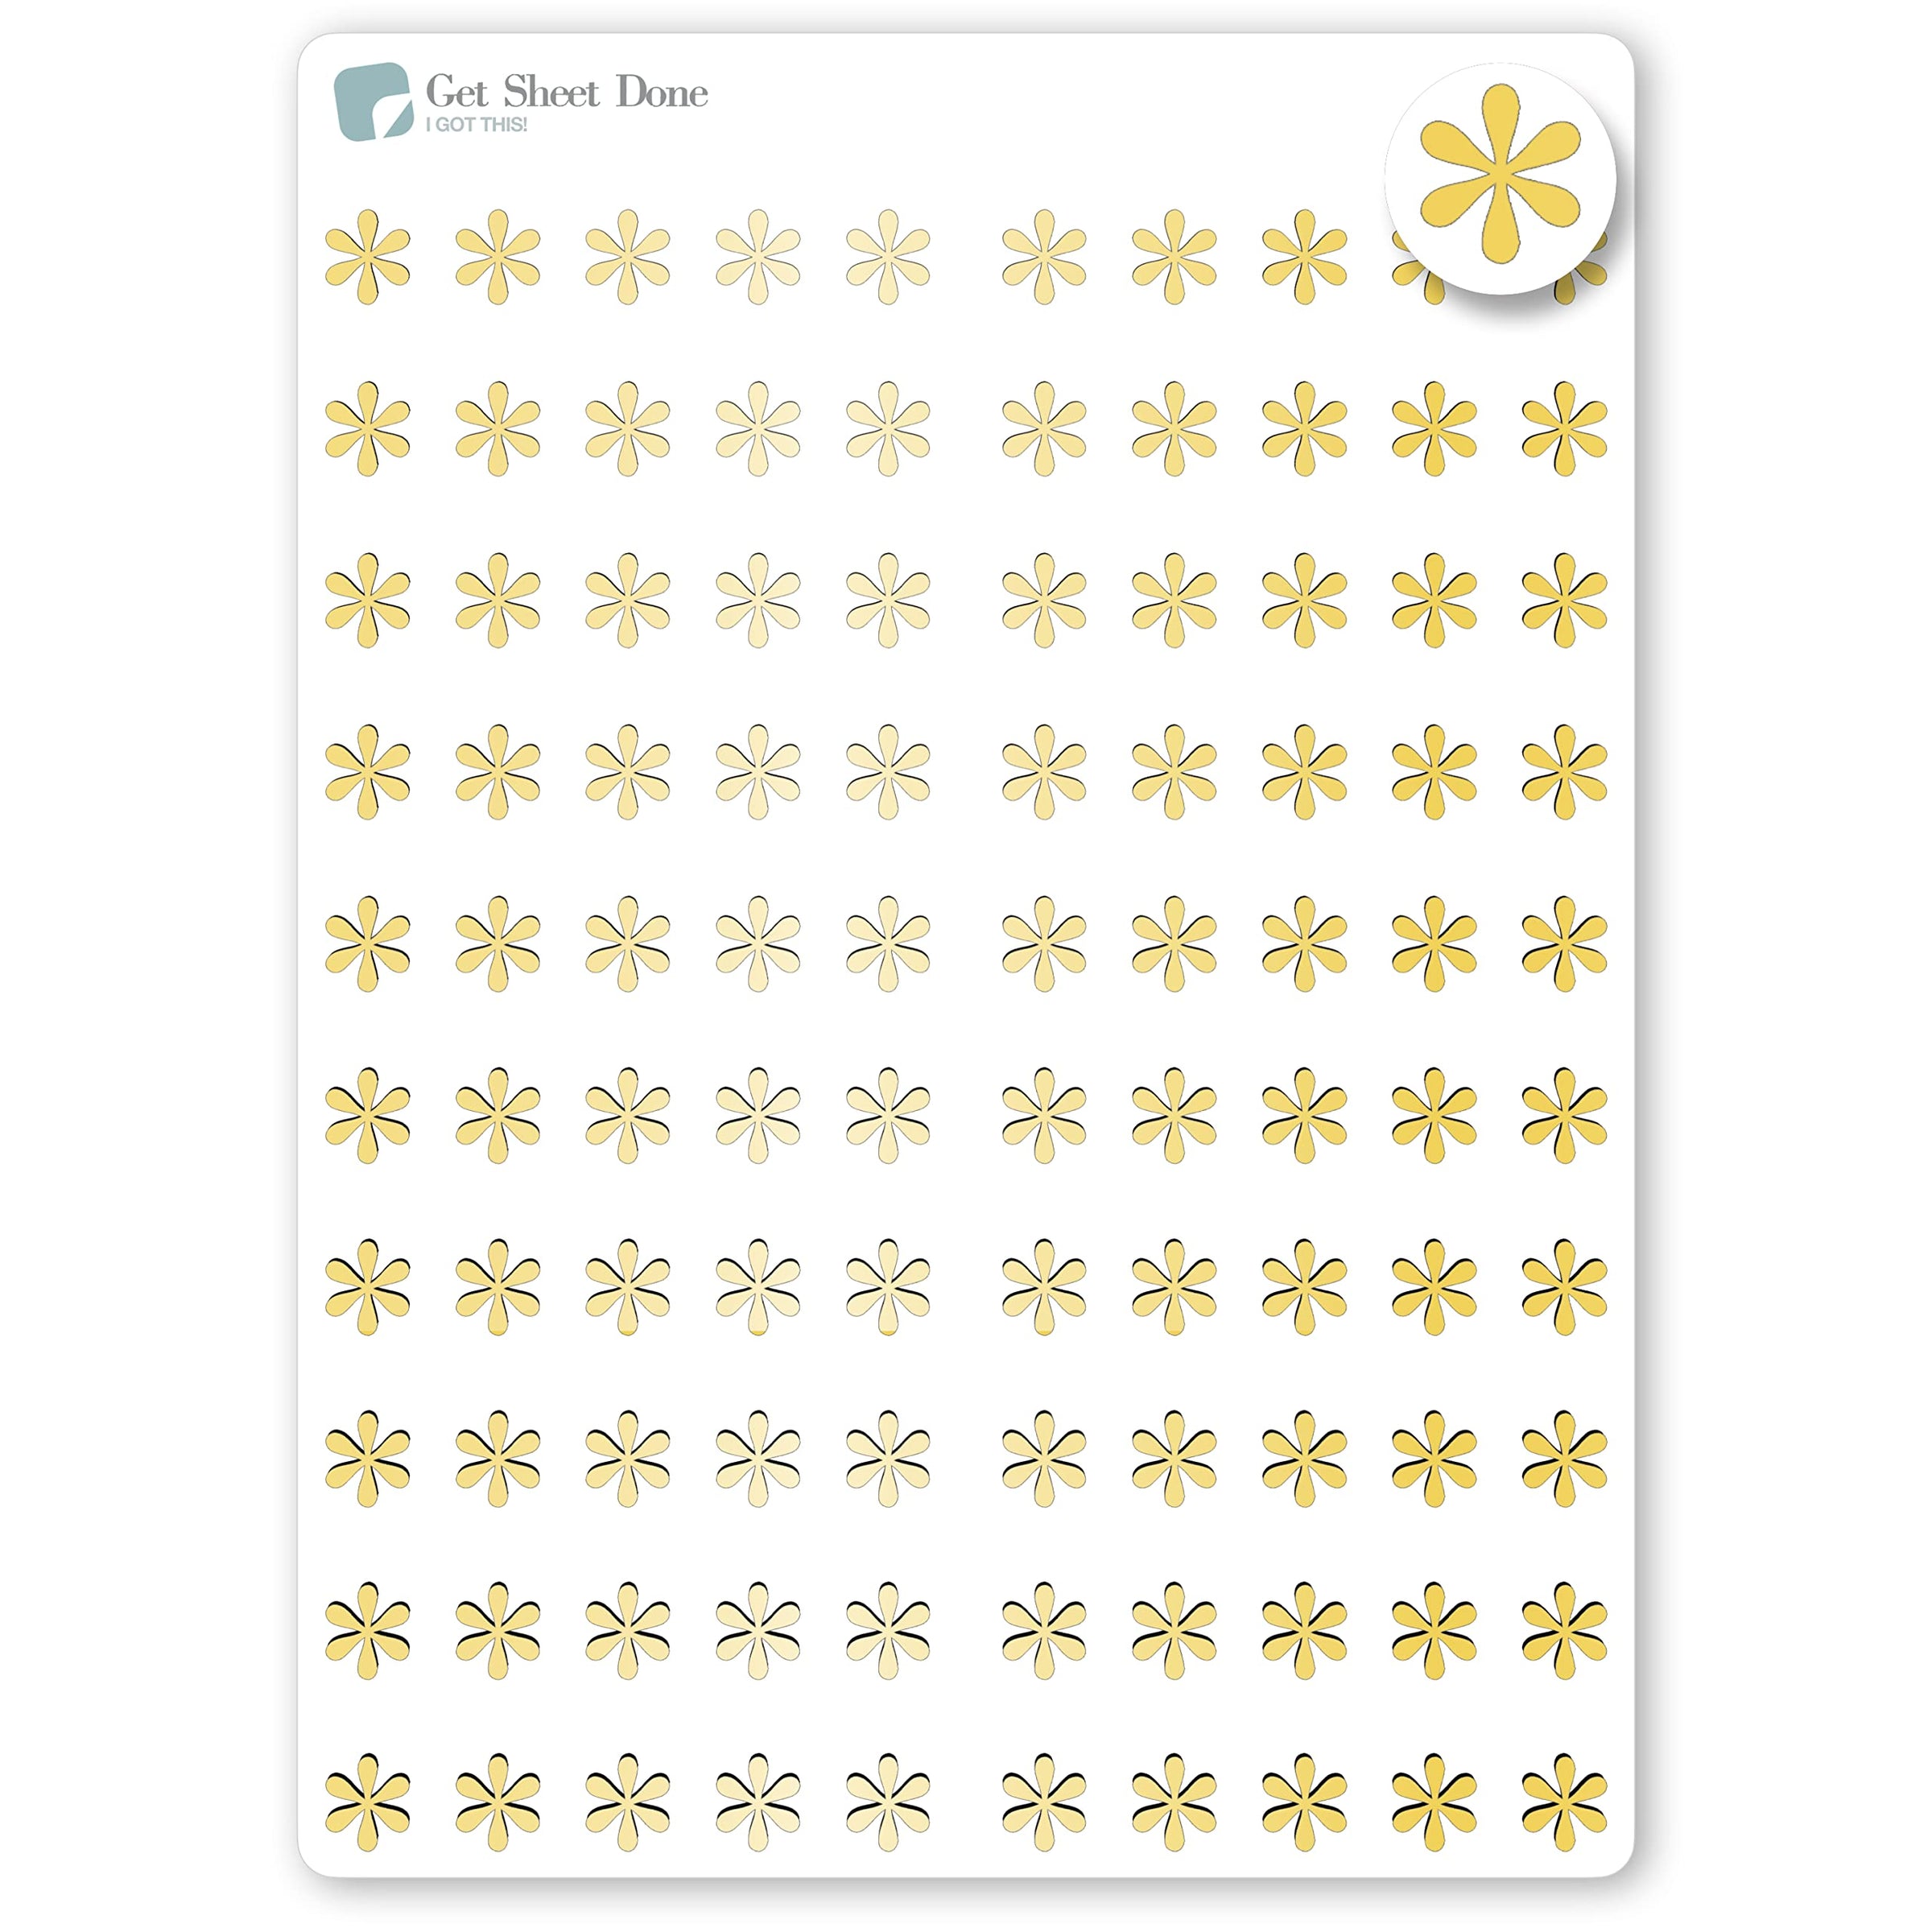 Gold Foiled Asterisk Dot   / 100 mini dots (1/3") / Productivity Bullet Point /Vinyl Micro Dots/ Accessory/Bujo Journaling Planner Stickers / Bullet Journaling / Bujo / Essential Productivity Stickers